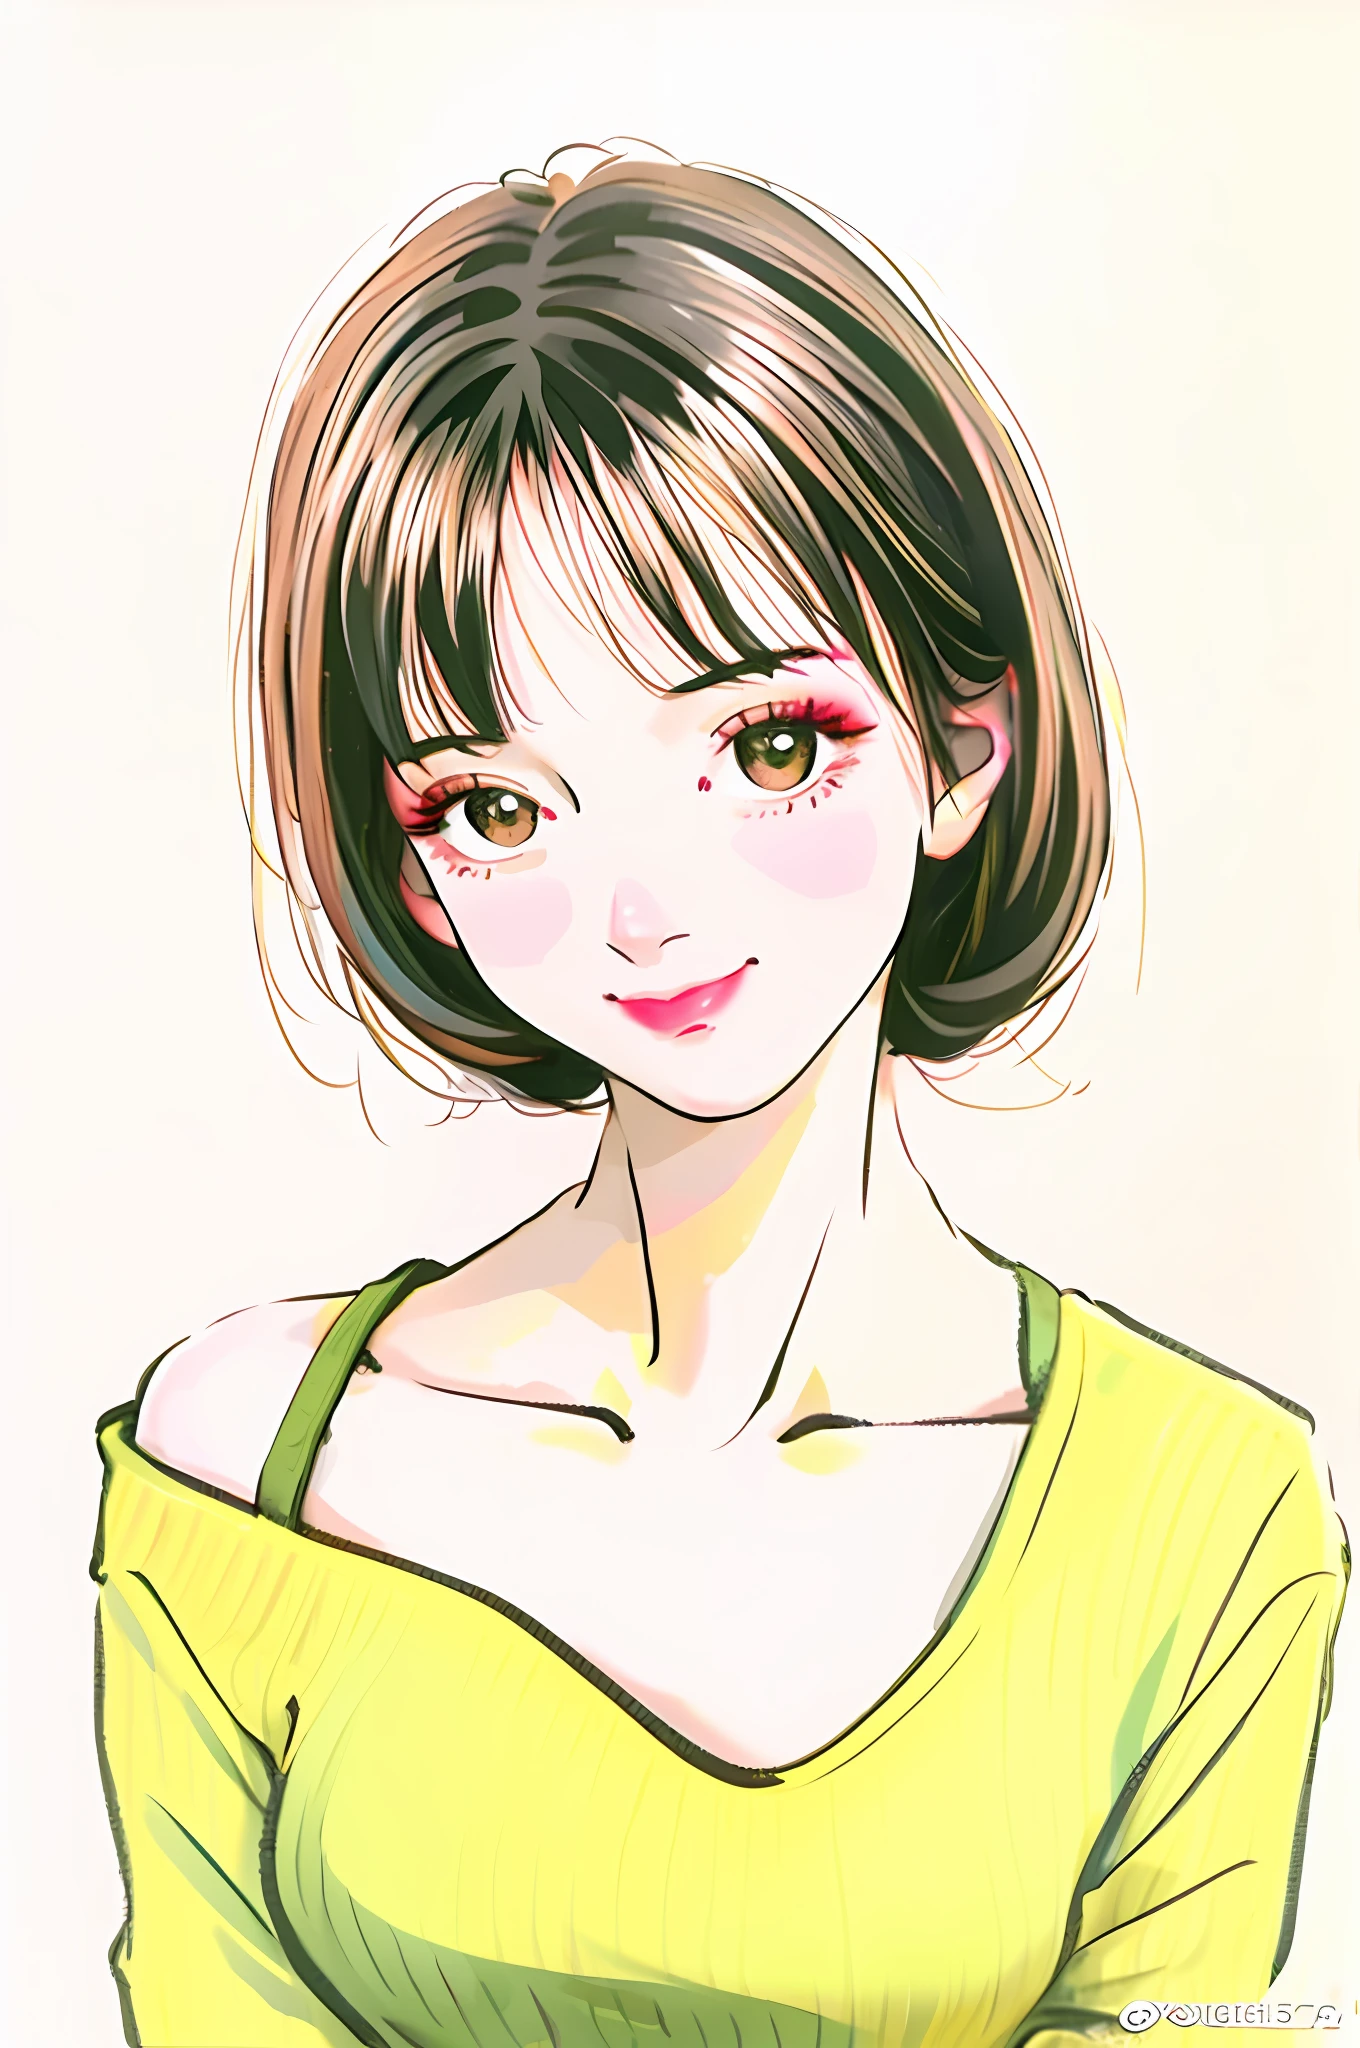 Top Quality, 1girl, Top of head, Bangs, Chest up, Black hair, Forehead, CHCH style, Simple background, Beautiful and striking eyes, Perfect face, Brown eyes, Smiling, Hands on face, Watch Viewer, Yellow-green turtle knit top, off-shoulder, Solo,